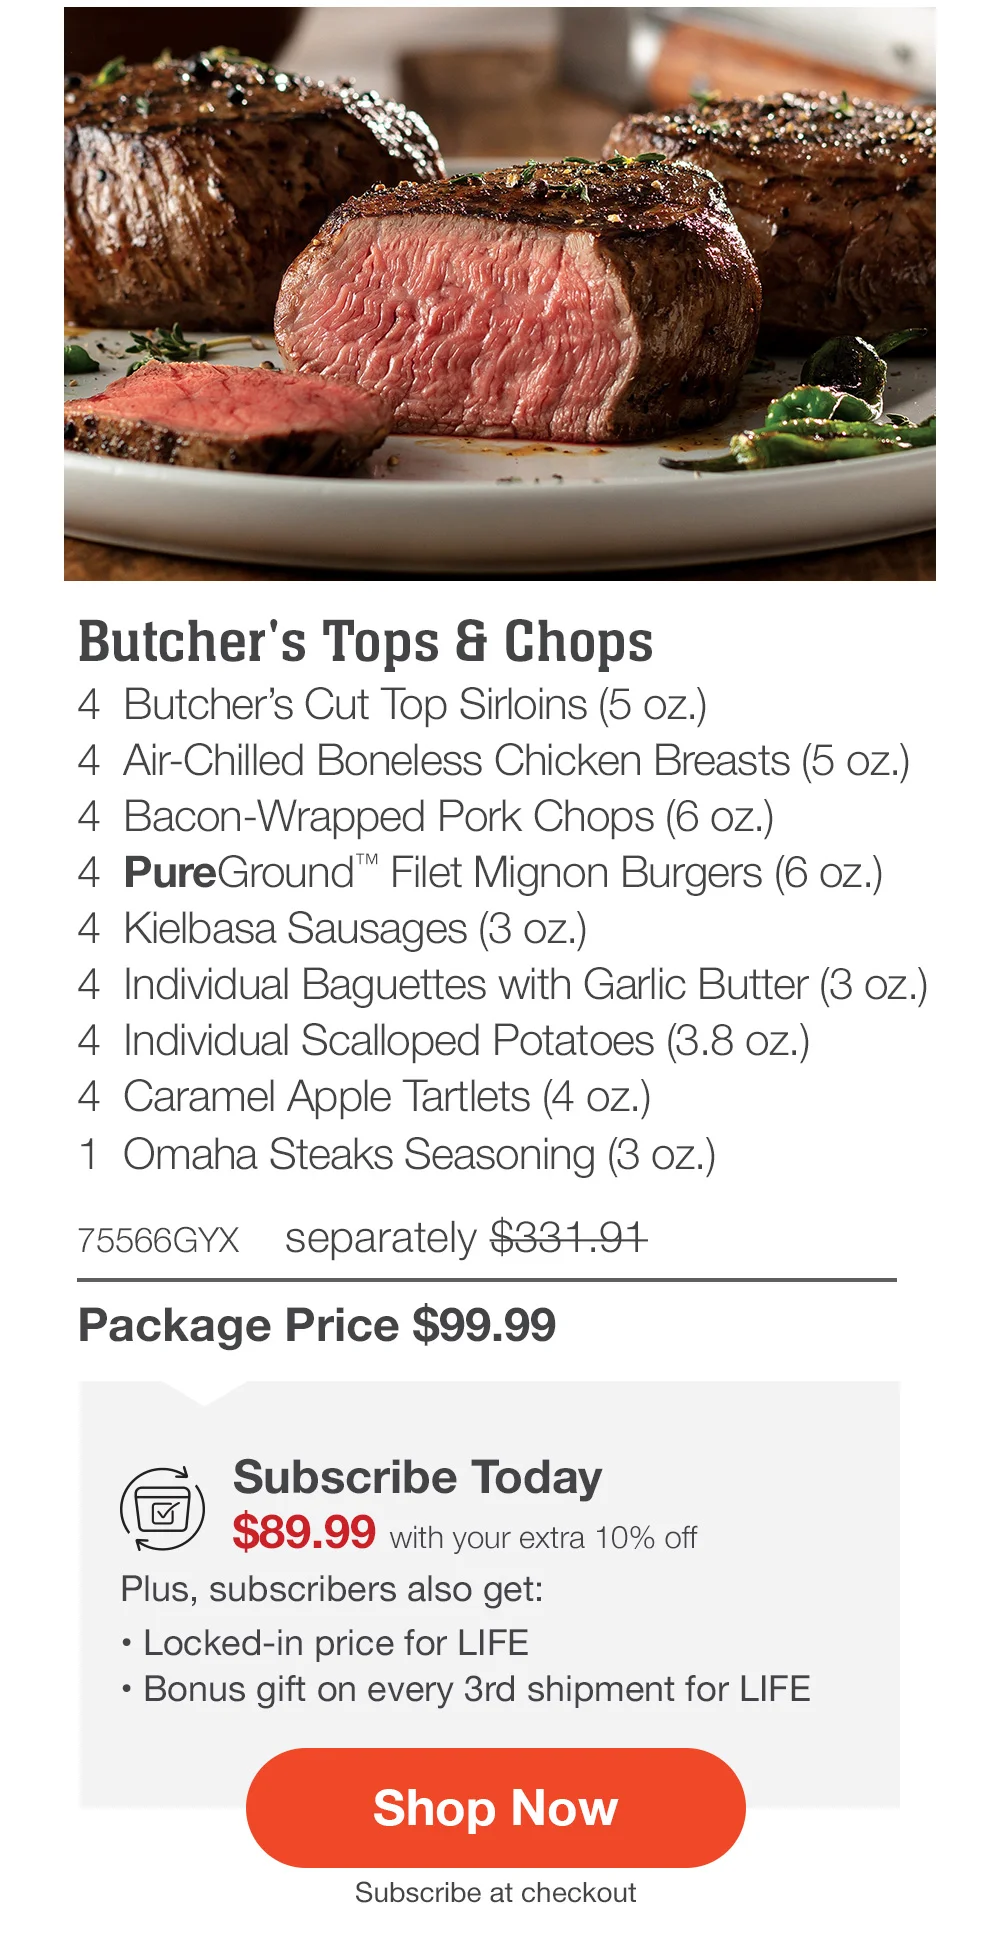 Butcher's Tops & Chops - 4 Butcher's Cut Top Sirloins (5 oz.) - 4 Air-Chilled Boneless Chicken Breasts (5 oz.) - 4 Bacon-Wrapped Pork Chops (6 oz.) - 4 PureGround™ Filet Mignon Burgers (6 oz.) - 4 Kielbasa Sausages (3 oz.) - 4 Individual Baguettes with Garlic Butter (3 oz.) - 4 Individual Scalloped Potatoes (3.8 oz.) - 4 Caramel Apple Tartlets (4 oz.) - 1 Omaha Steaks Seasoning (3 oz.) - 75566GYX separately \\$331.91 | Package Price \\$99.99 | Subscribe Today - \\$89.99 with your extra 10% off Plus, subscribers also get: Locked-in price for LIFE | Bonus gift on every 3rd shipment for LIFE || Shop Now || Subscribe at checkout